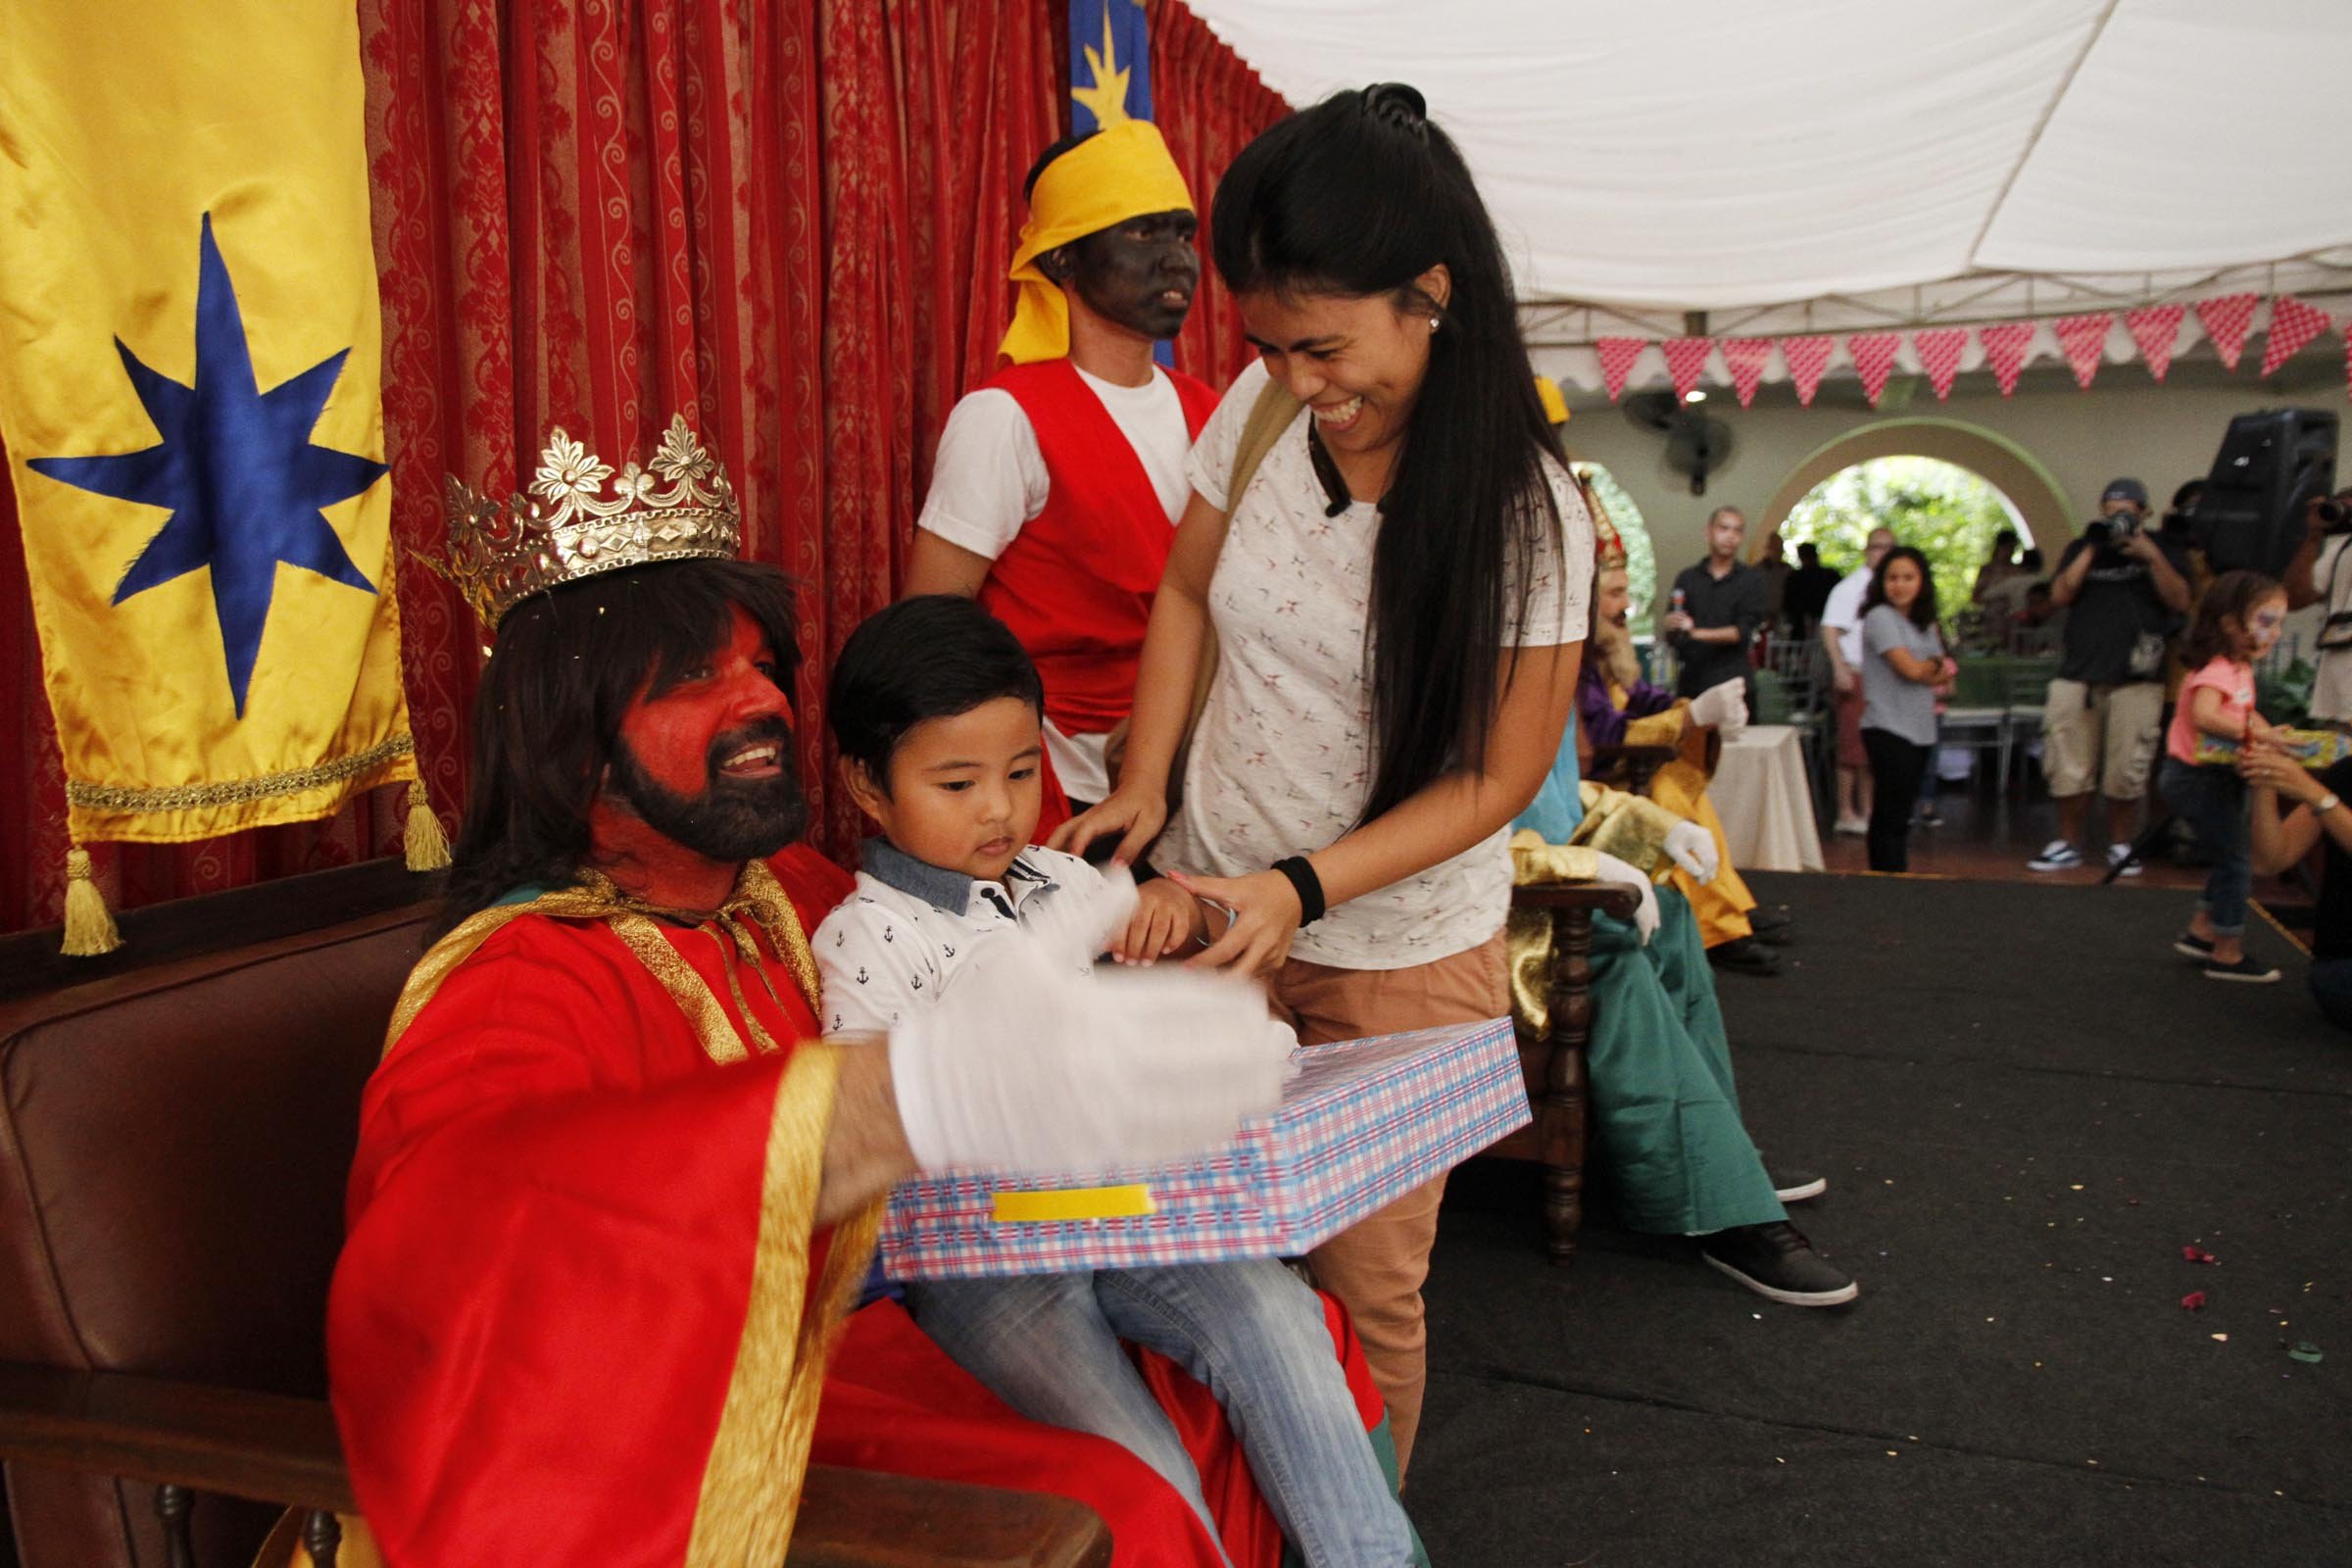 'Kings' distribute gifts to children